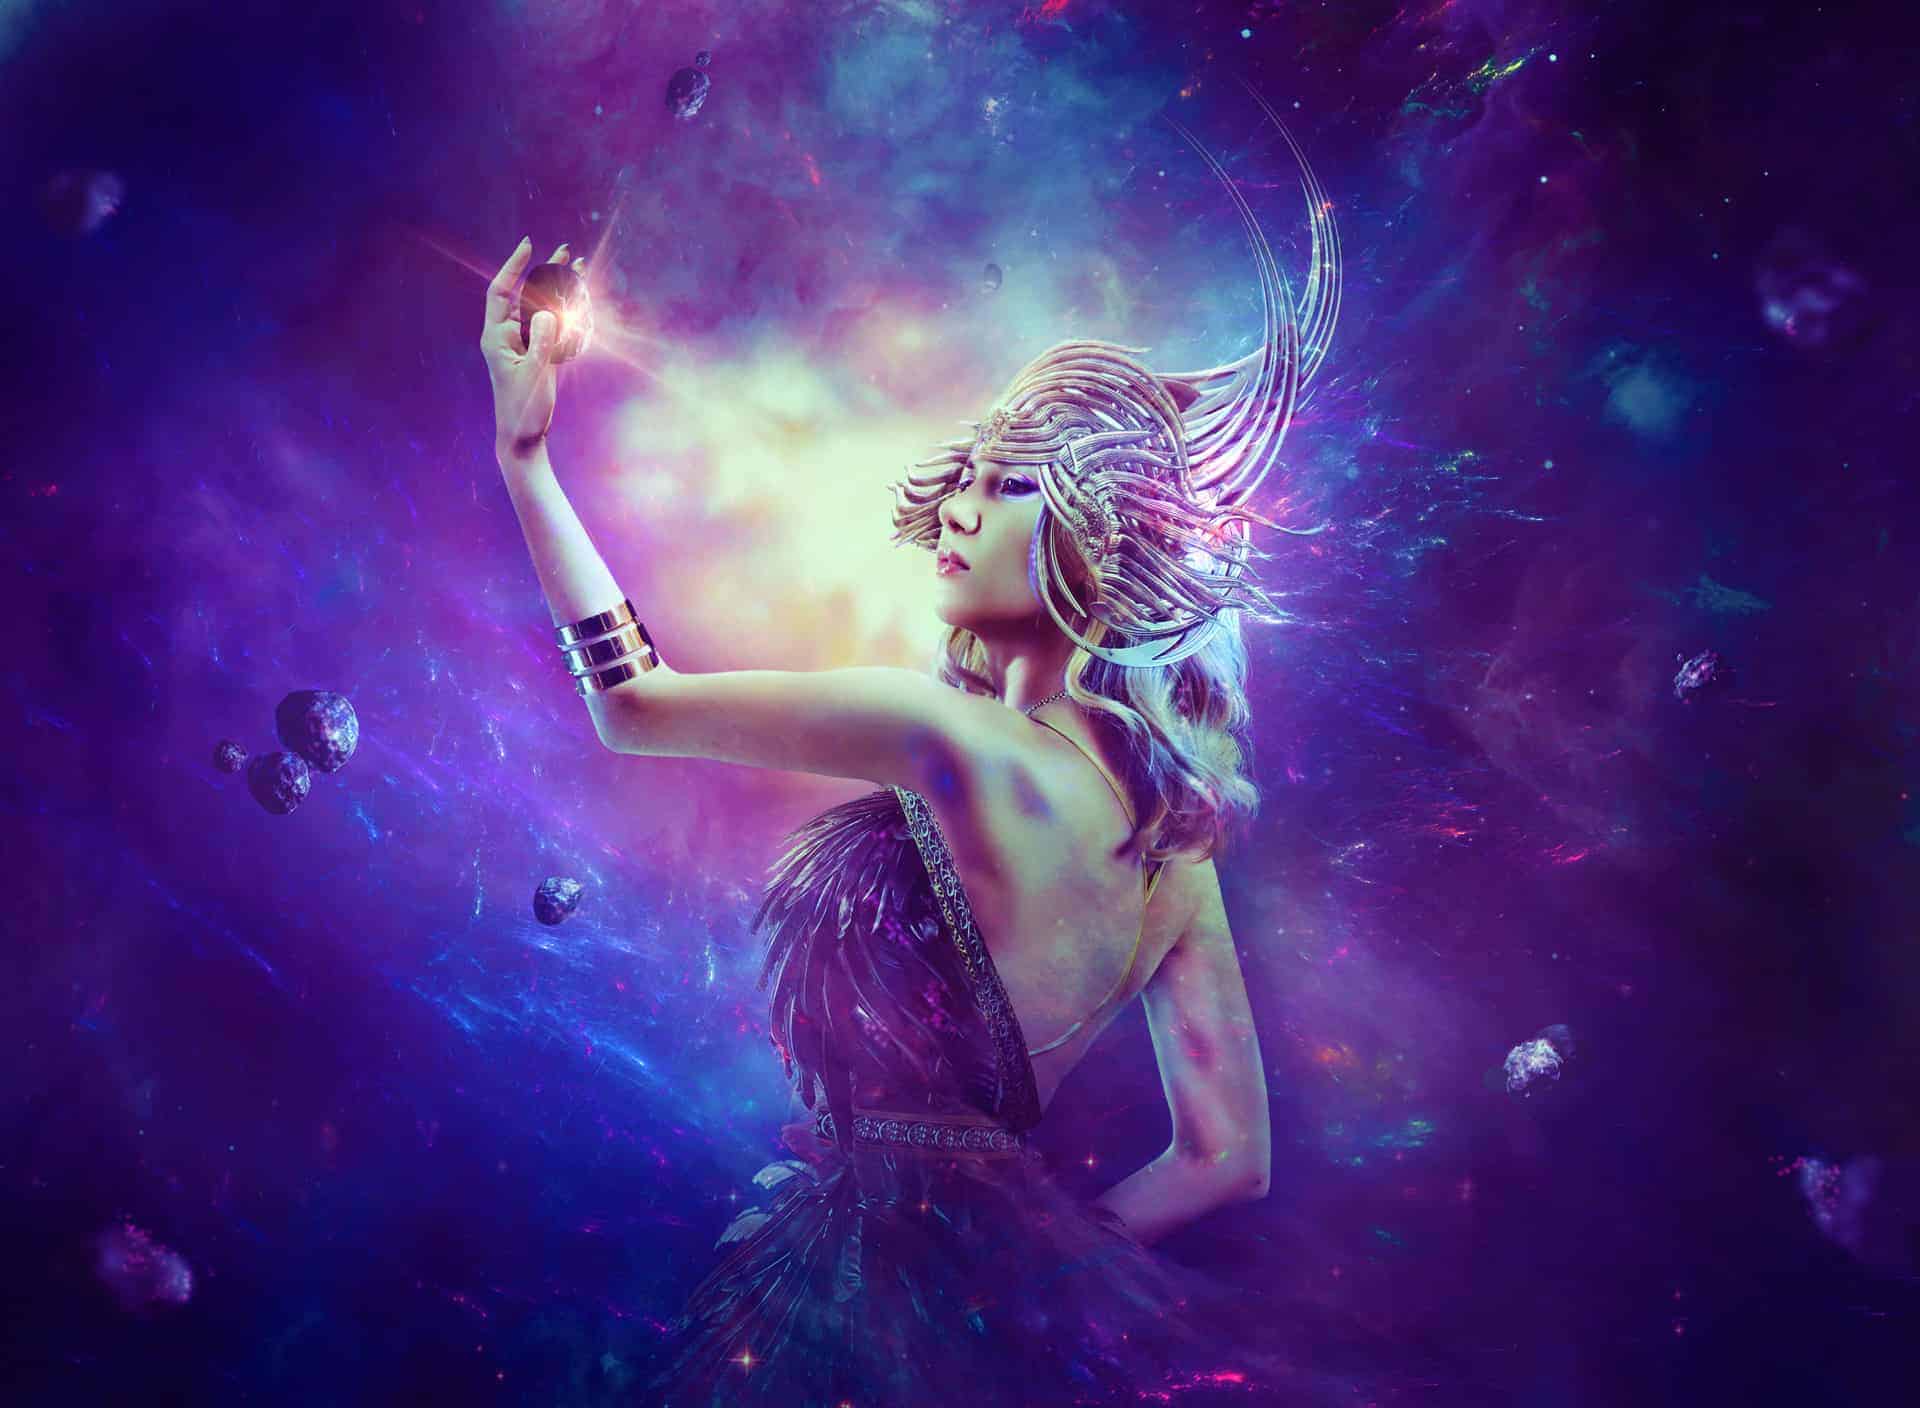 How to Create a Fantasy Woman Photo Manipulation with Adobe Photoshop